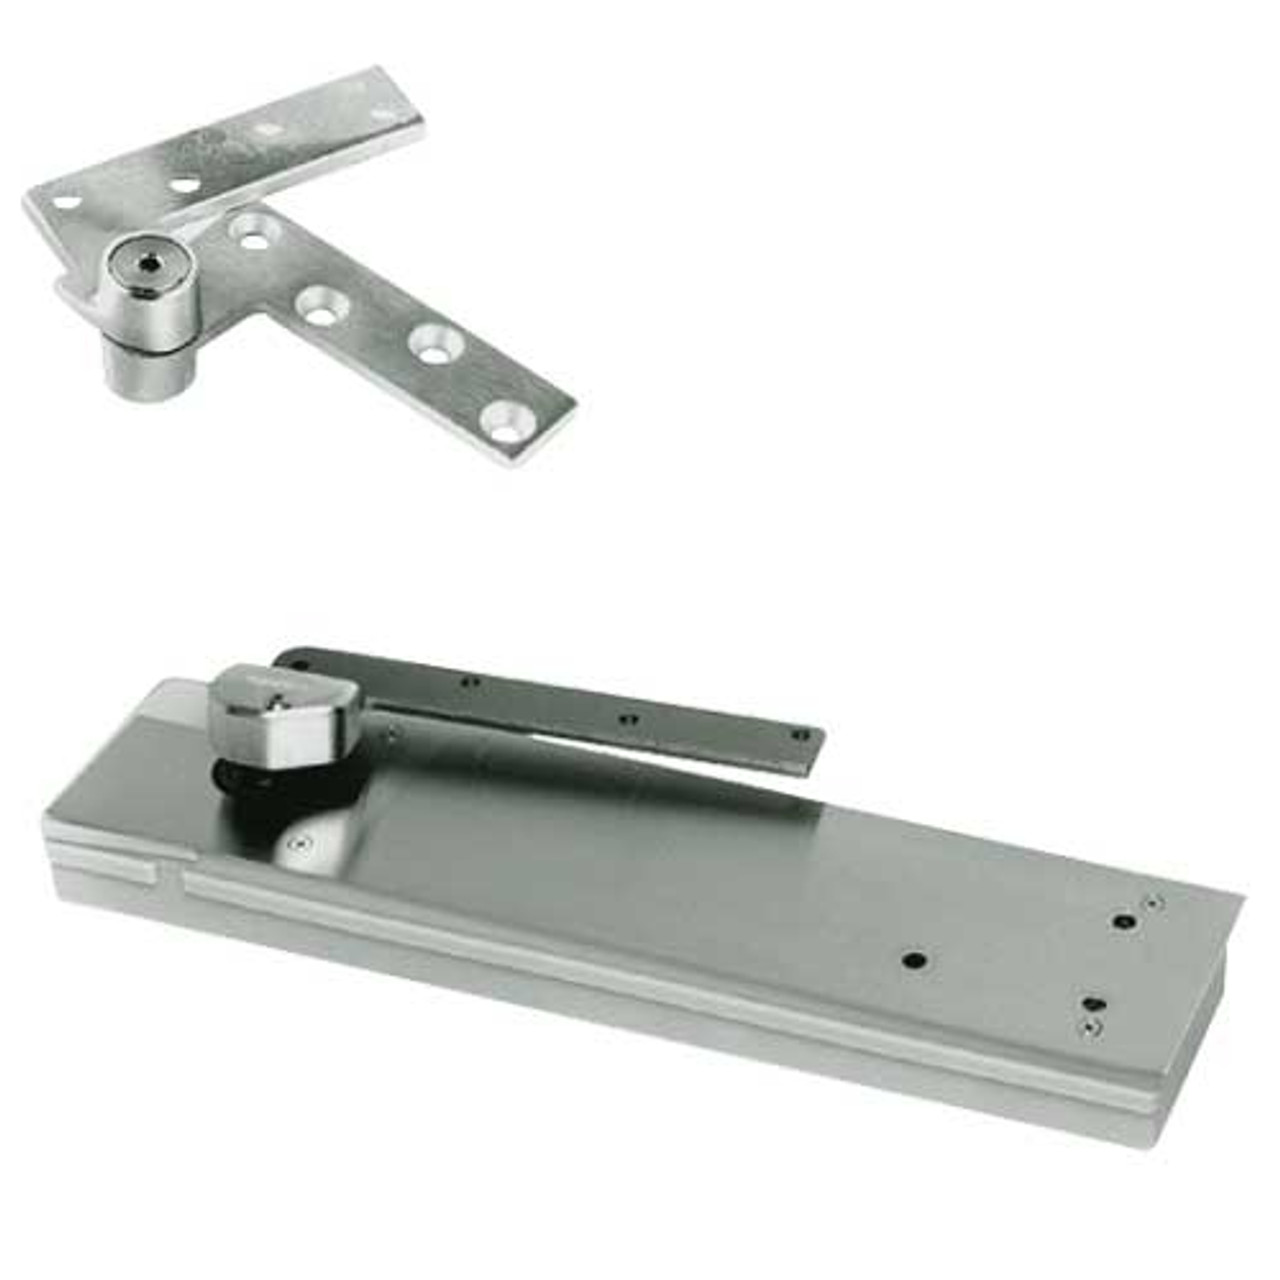 5103ABC105-1-1/2OS-SC-LH-619 Rixson 51 Series 1-1/2" Offset Hung Shallow Depth Floor Closers in Satin Nickel Finish